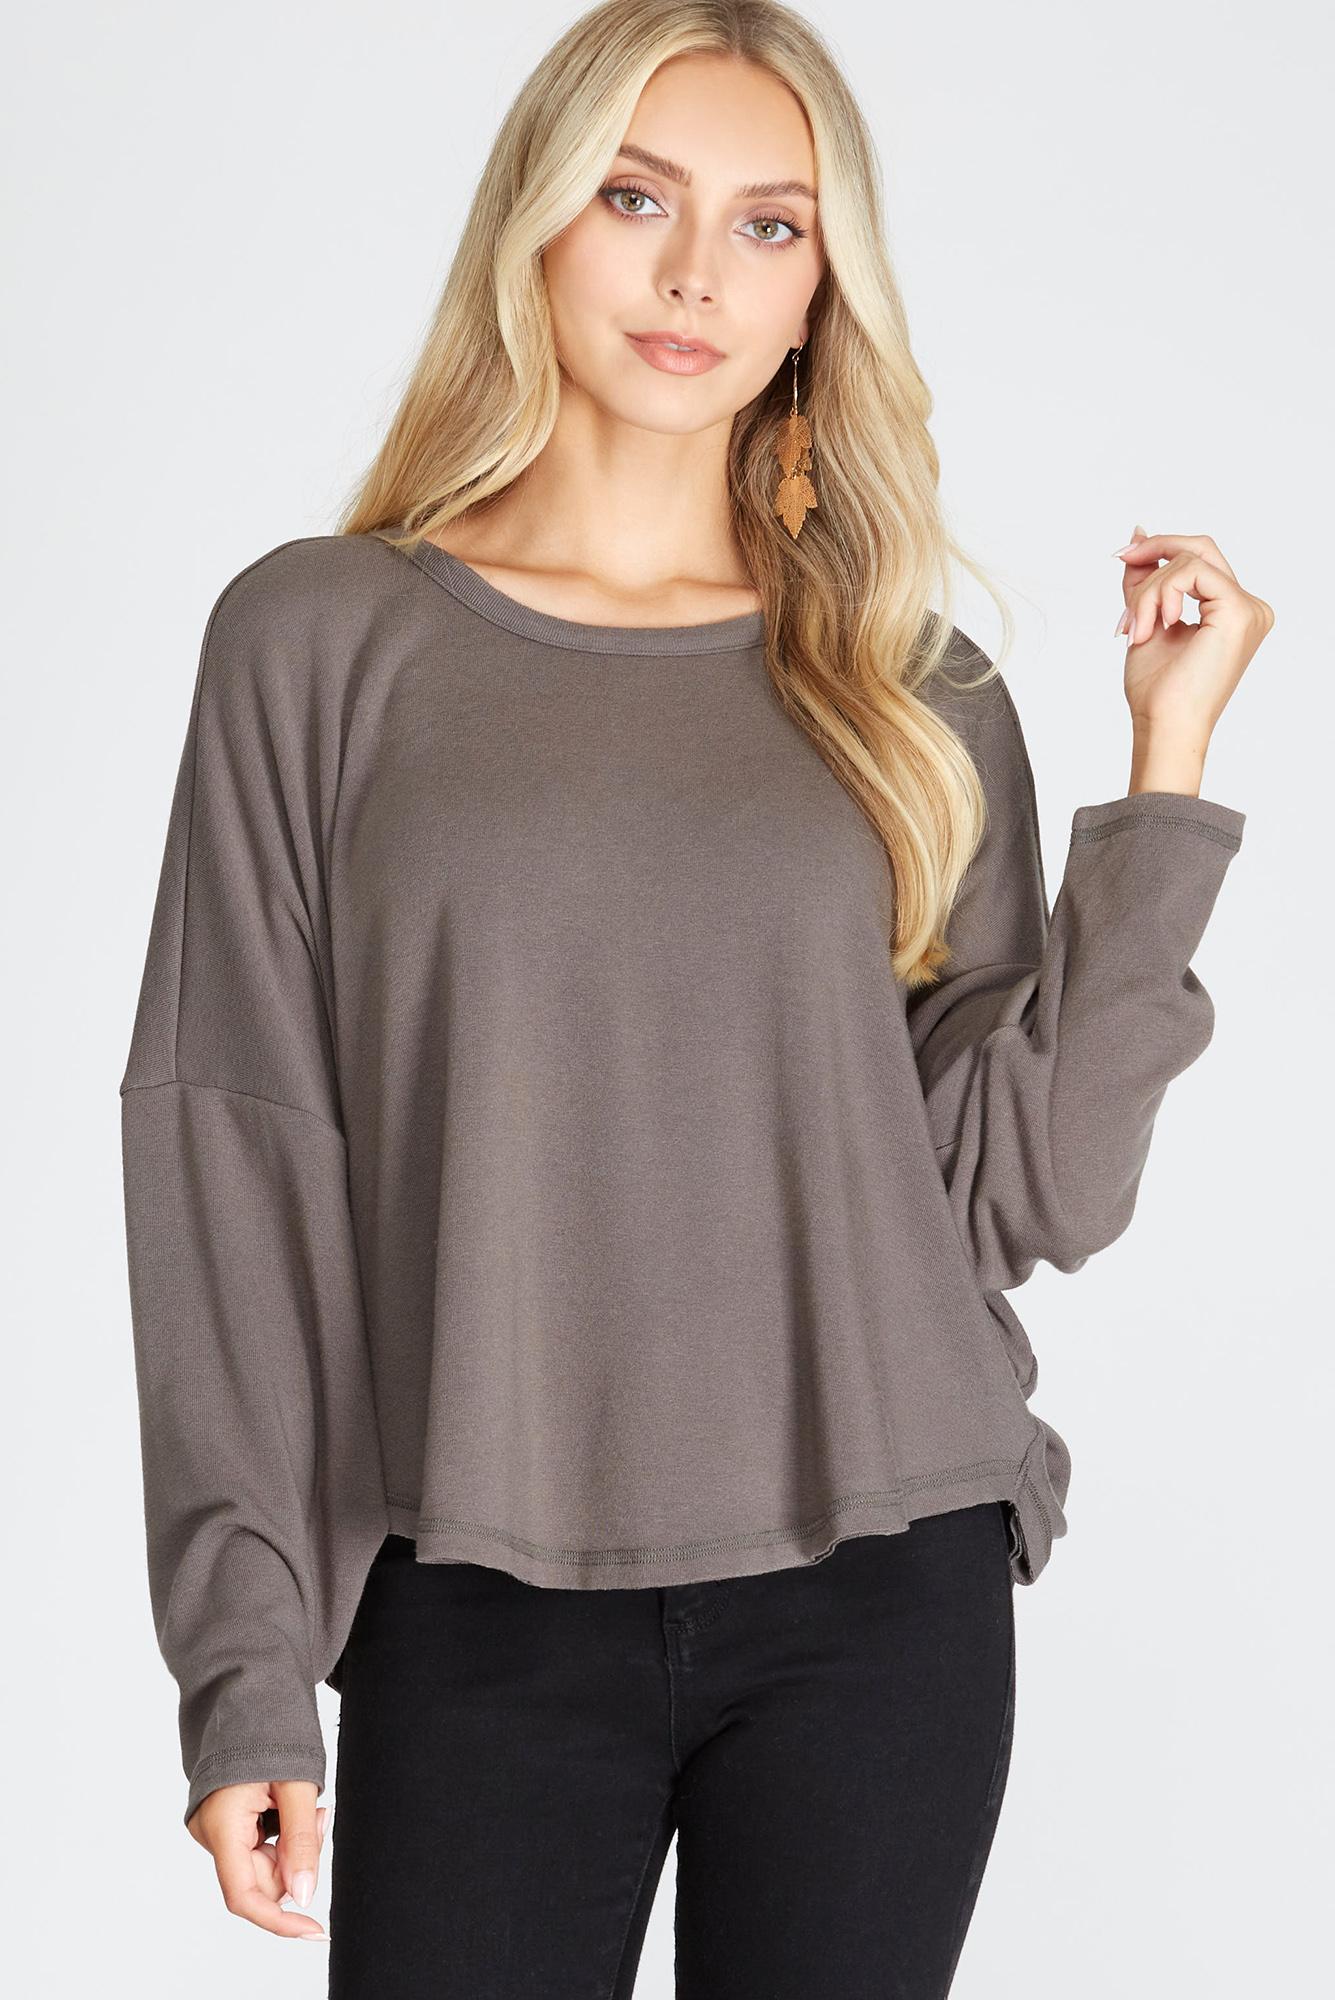 Yours Truly Batwing Sleeve Knit Top